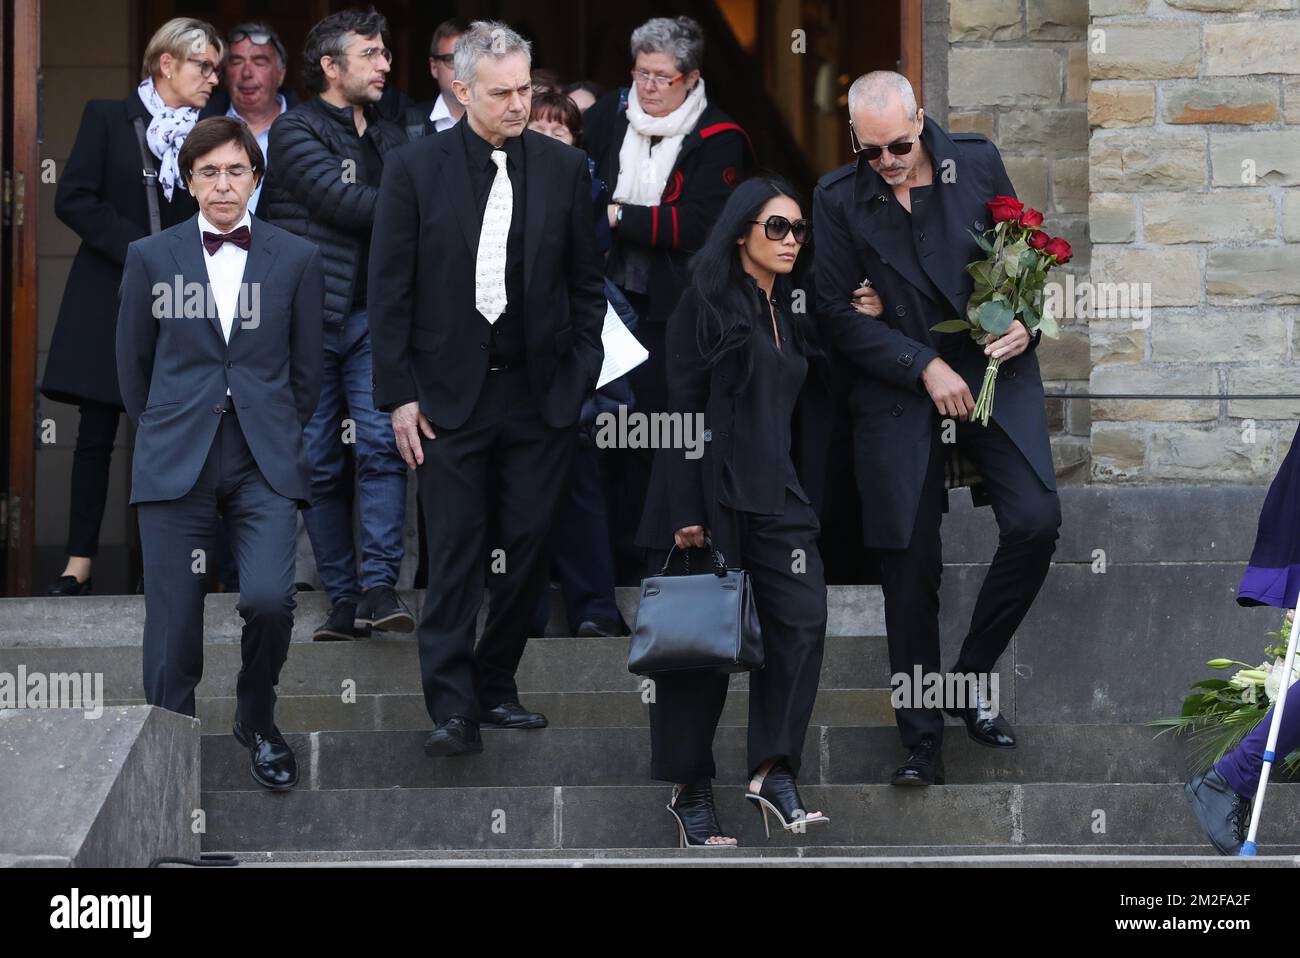 Elio Di Rupo and singer Anggun Cipta Sasmi leave after the funeral ceremony for Belgian singer Maurane (Claudine Luypaerts) Thursday 17 May 2018 in Brussels. Maurane was found dead in her home on May 7th, she was 57 years old. BELGA PHOTO VIRGINIE LEFOUR Stock Photo